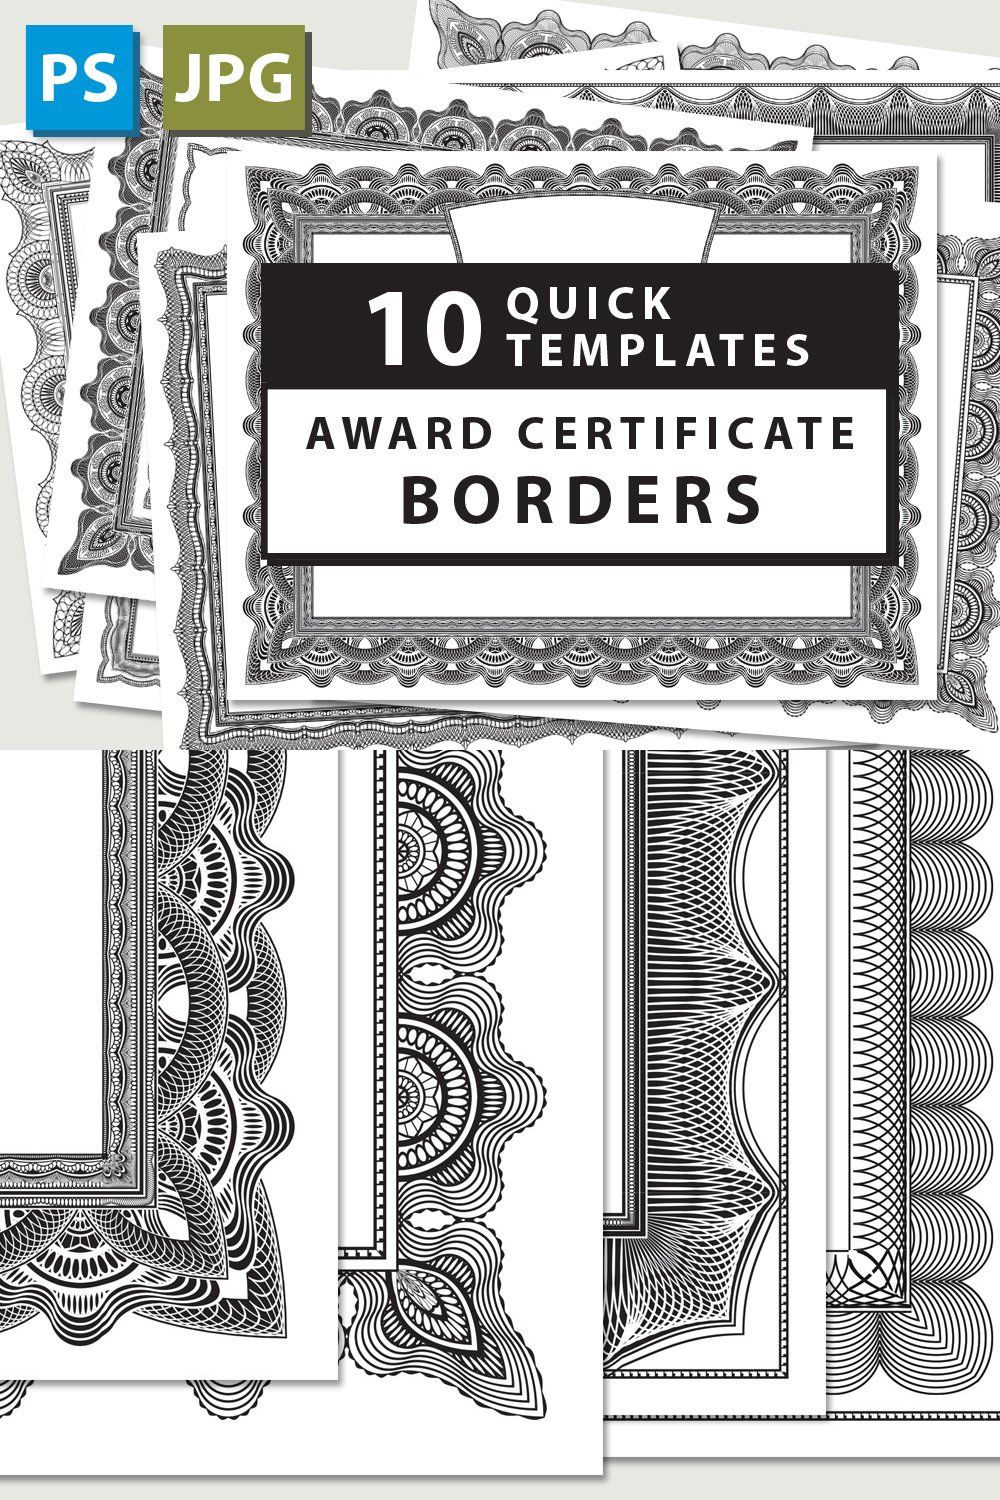 10 Award Certificate Templates pinterest preview image.